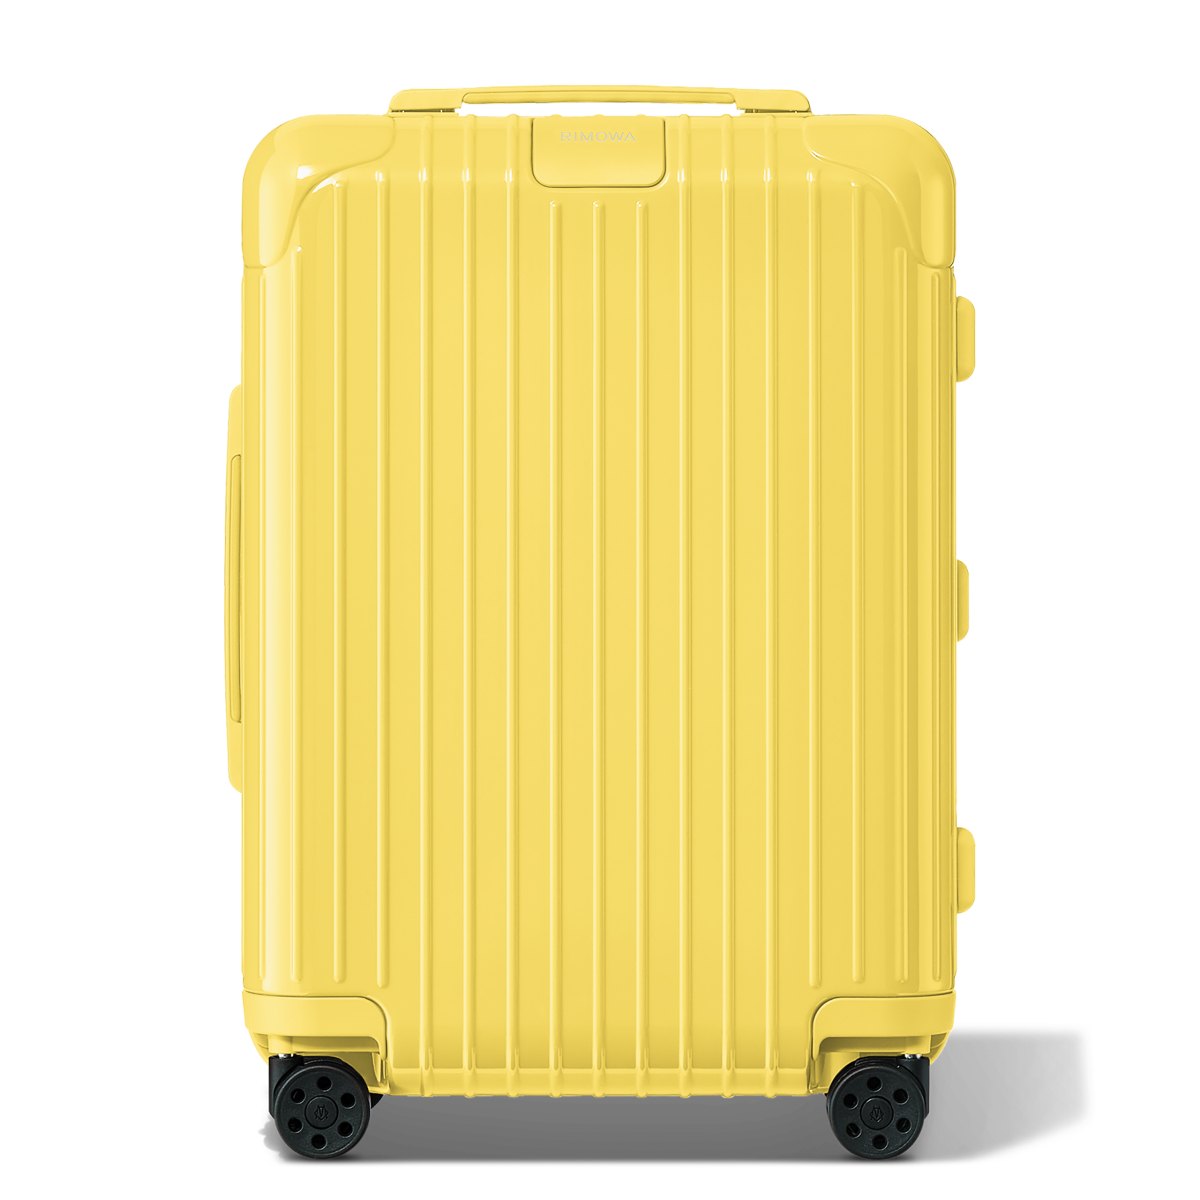 RIMOWA Launches Summer Capsule in Pastel Colors